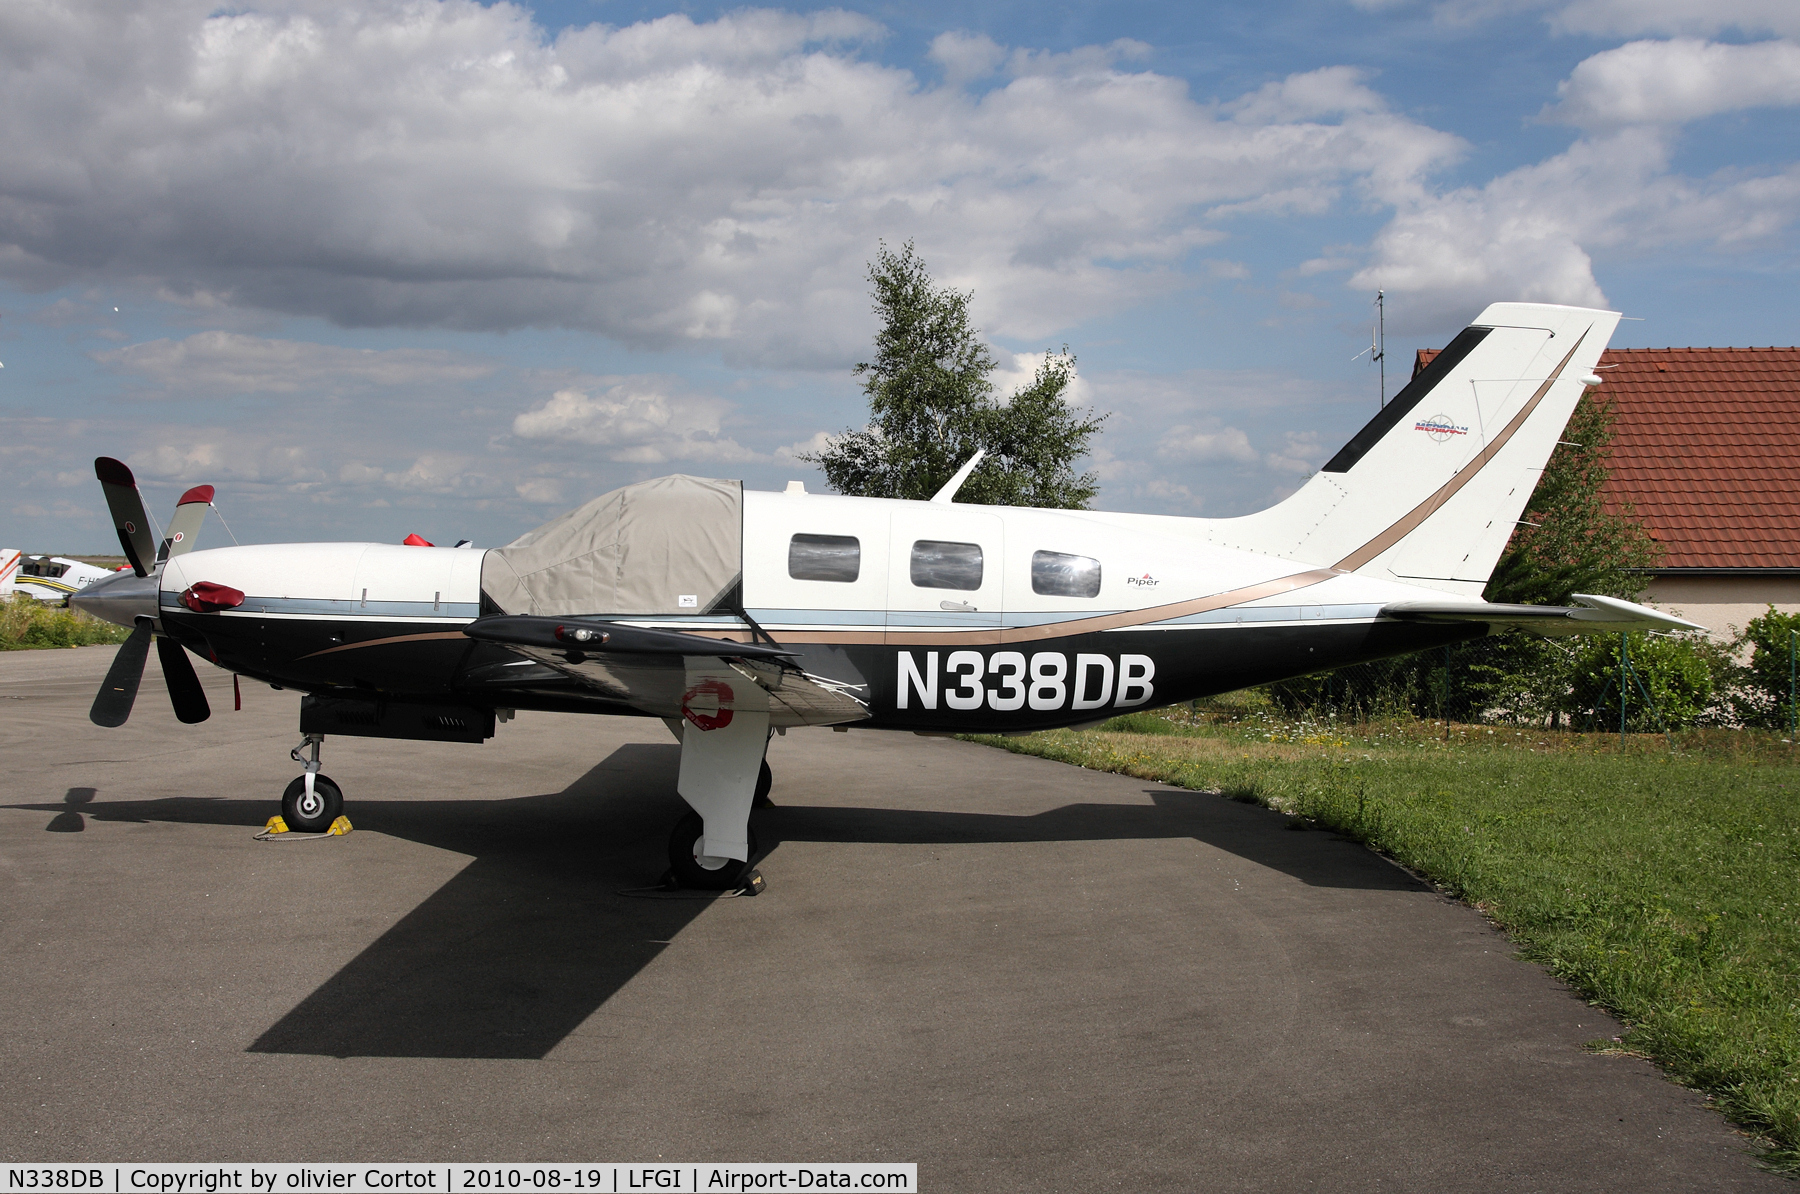 N338DB, 2003 Piper PA-46-500TP C/N 4697155, Now property of the famous warbirds owner Christophe Jacquard